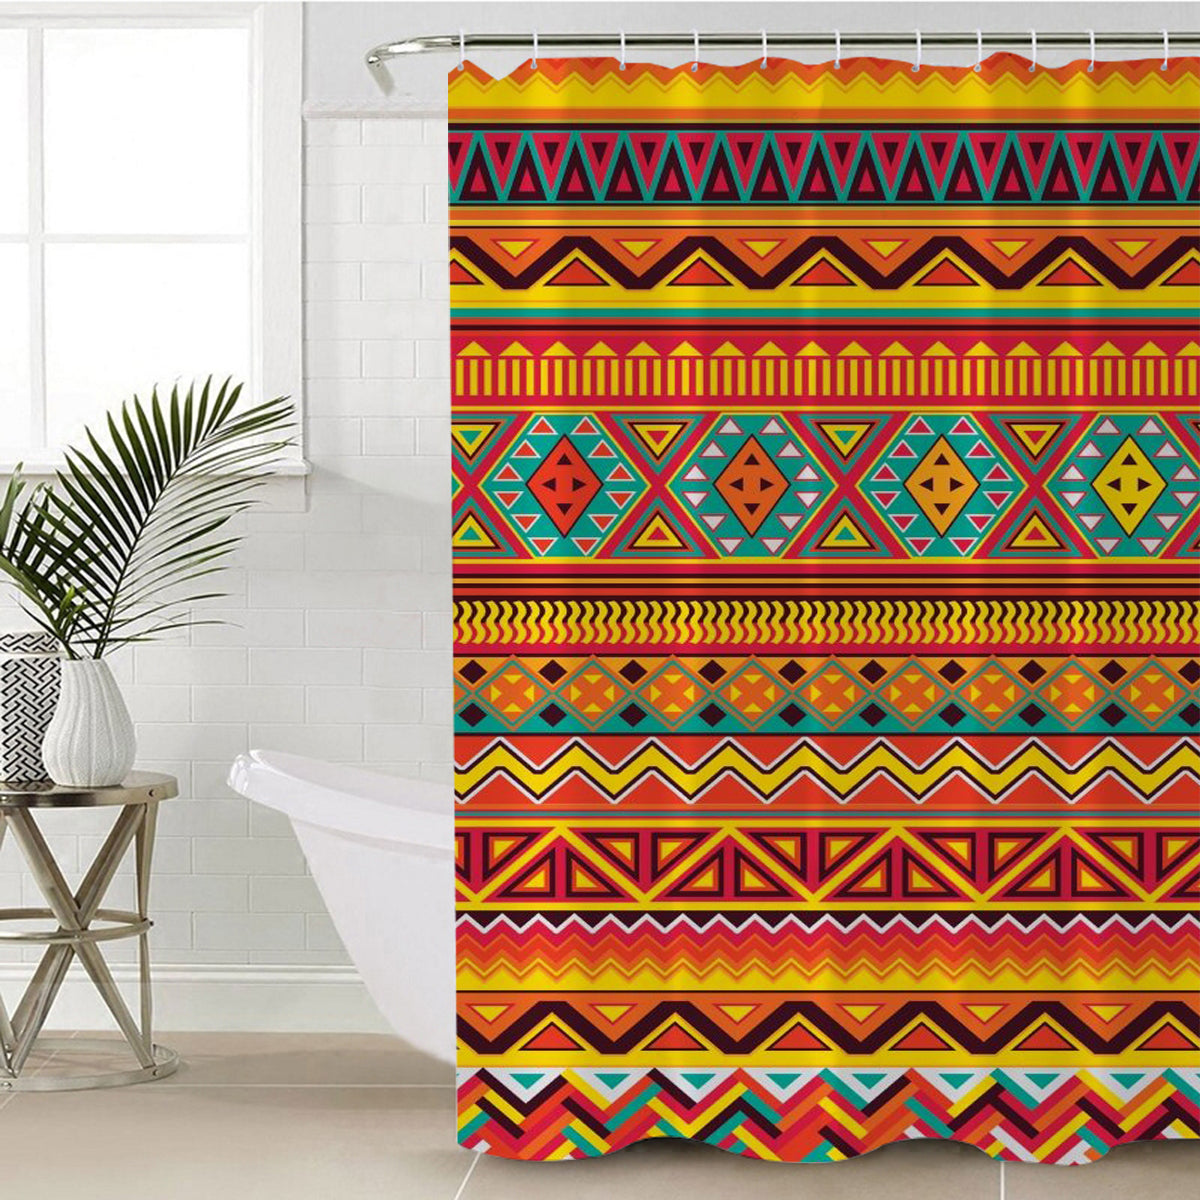 full-color-patter-tribal-shower-curtain